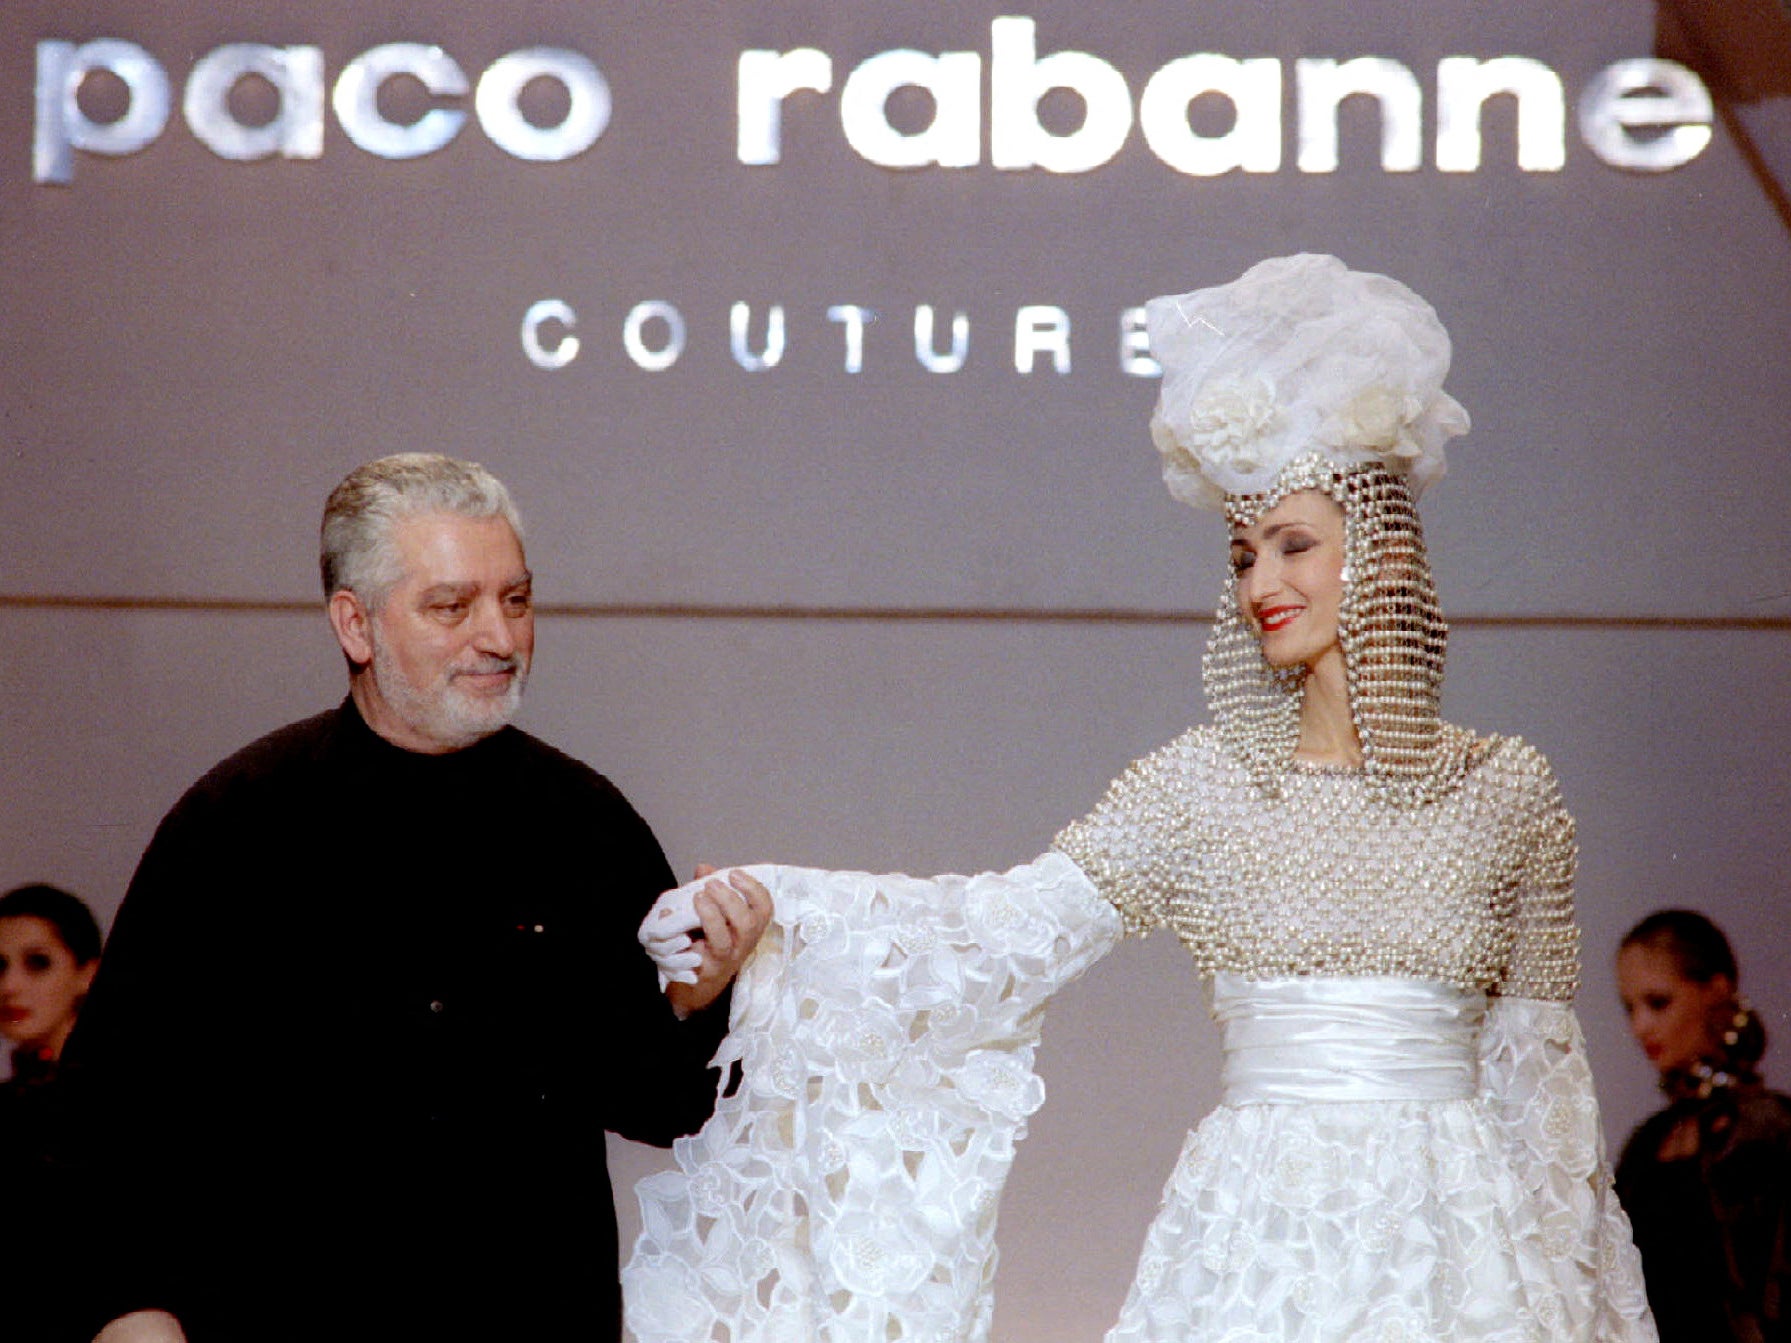 Paco Rabanne with one of his models at the finale of a show at Rossiya Hotel in Moscow